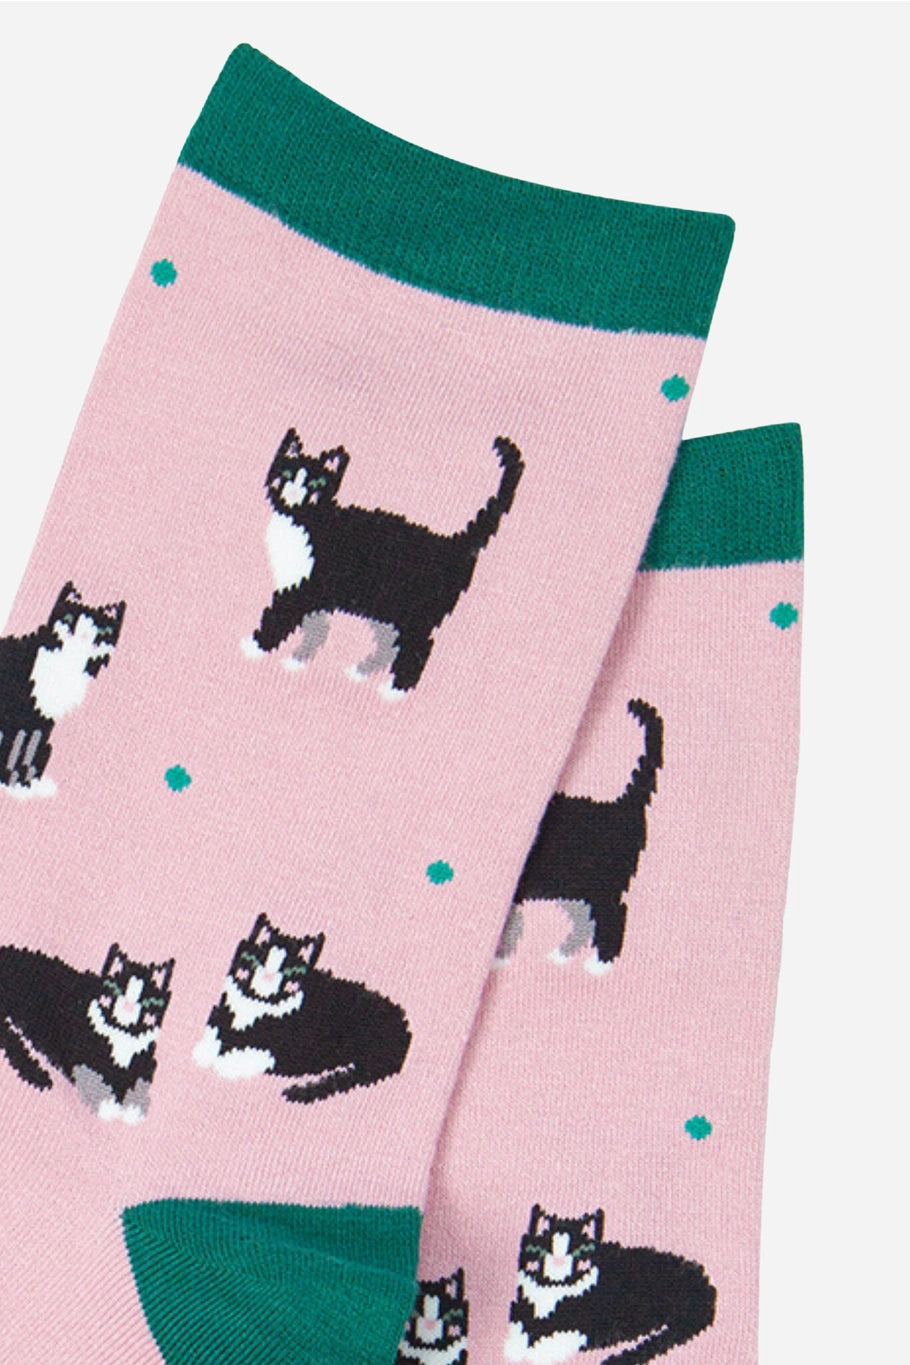 Women's Pink Bamboo Socks with Black Cats